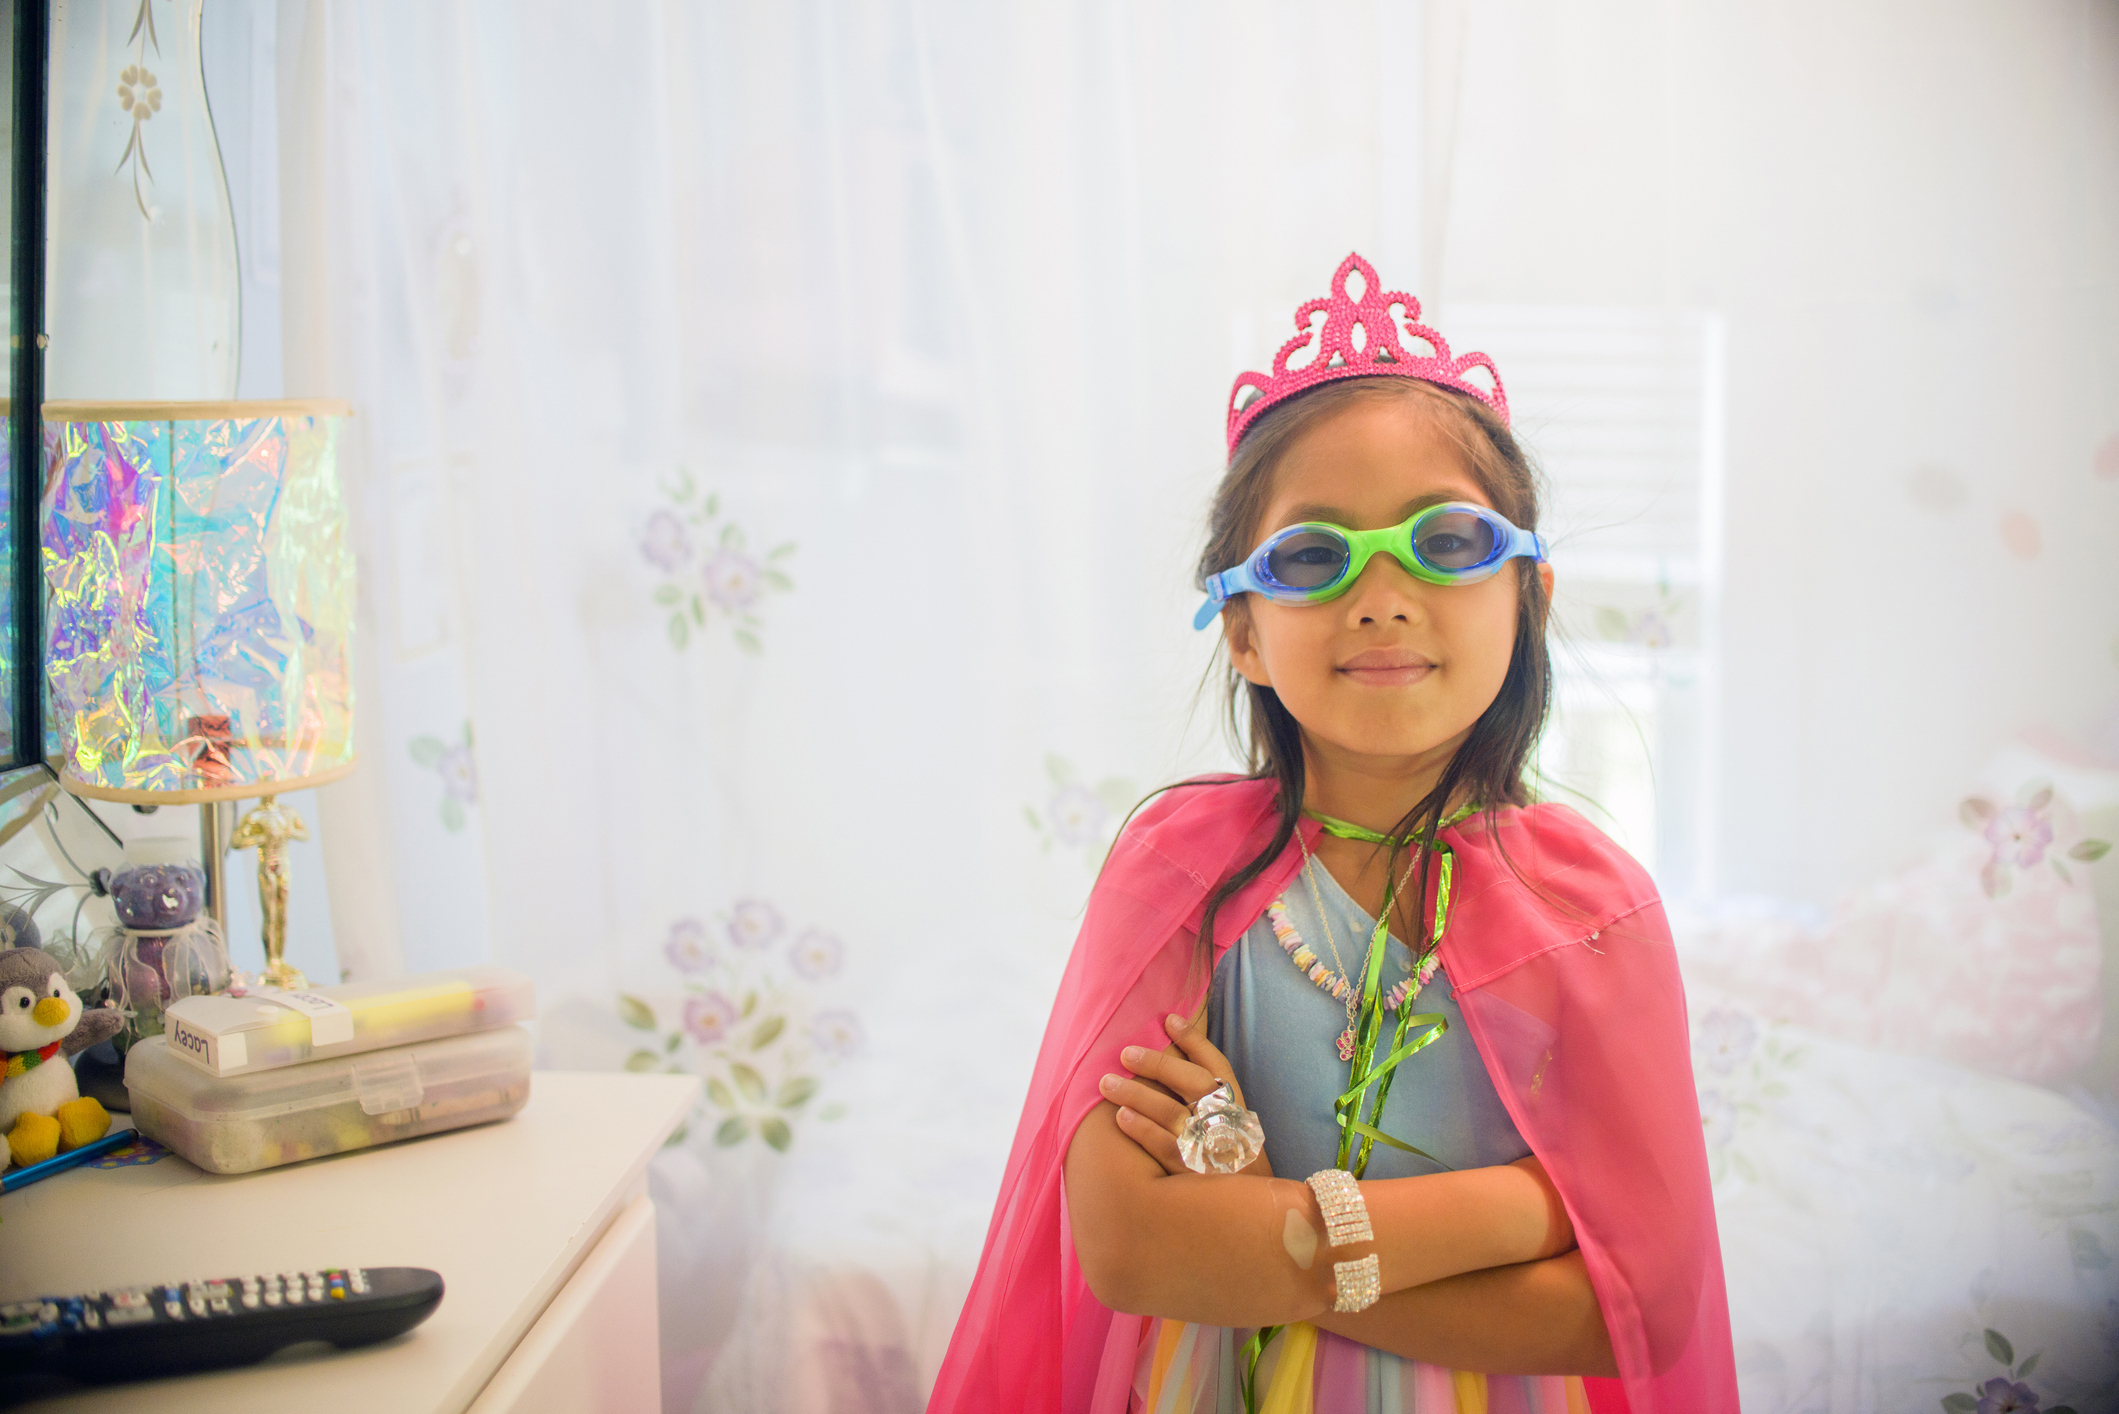 Child in a cape and tiara with goggles, posing confidently in a bedroom